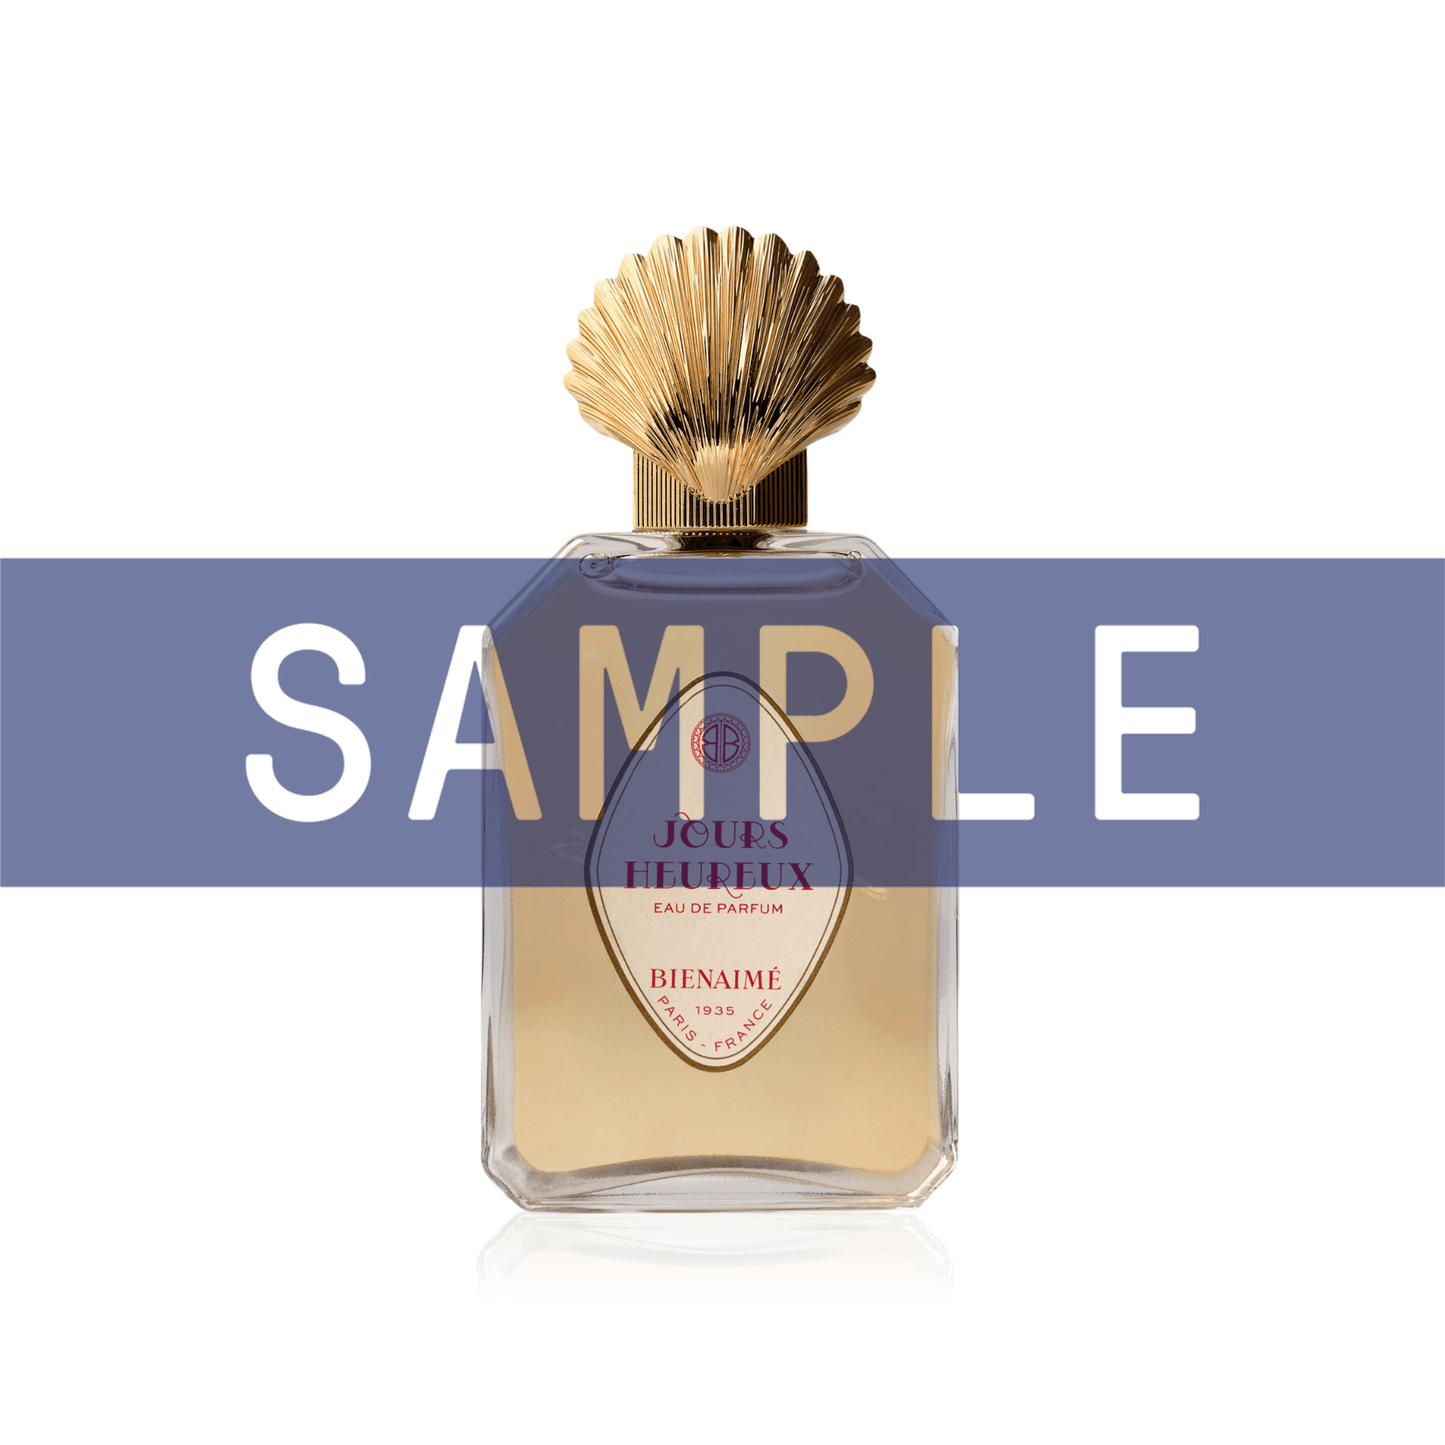 Primary Image of Sample - Jours Heureux EDP